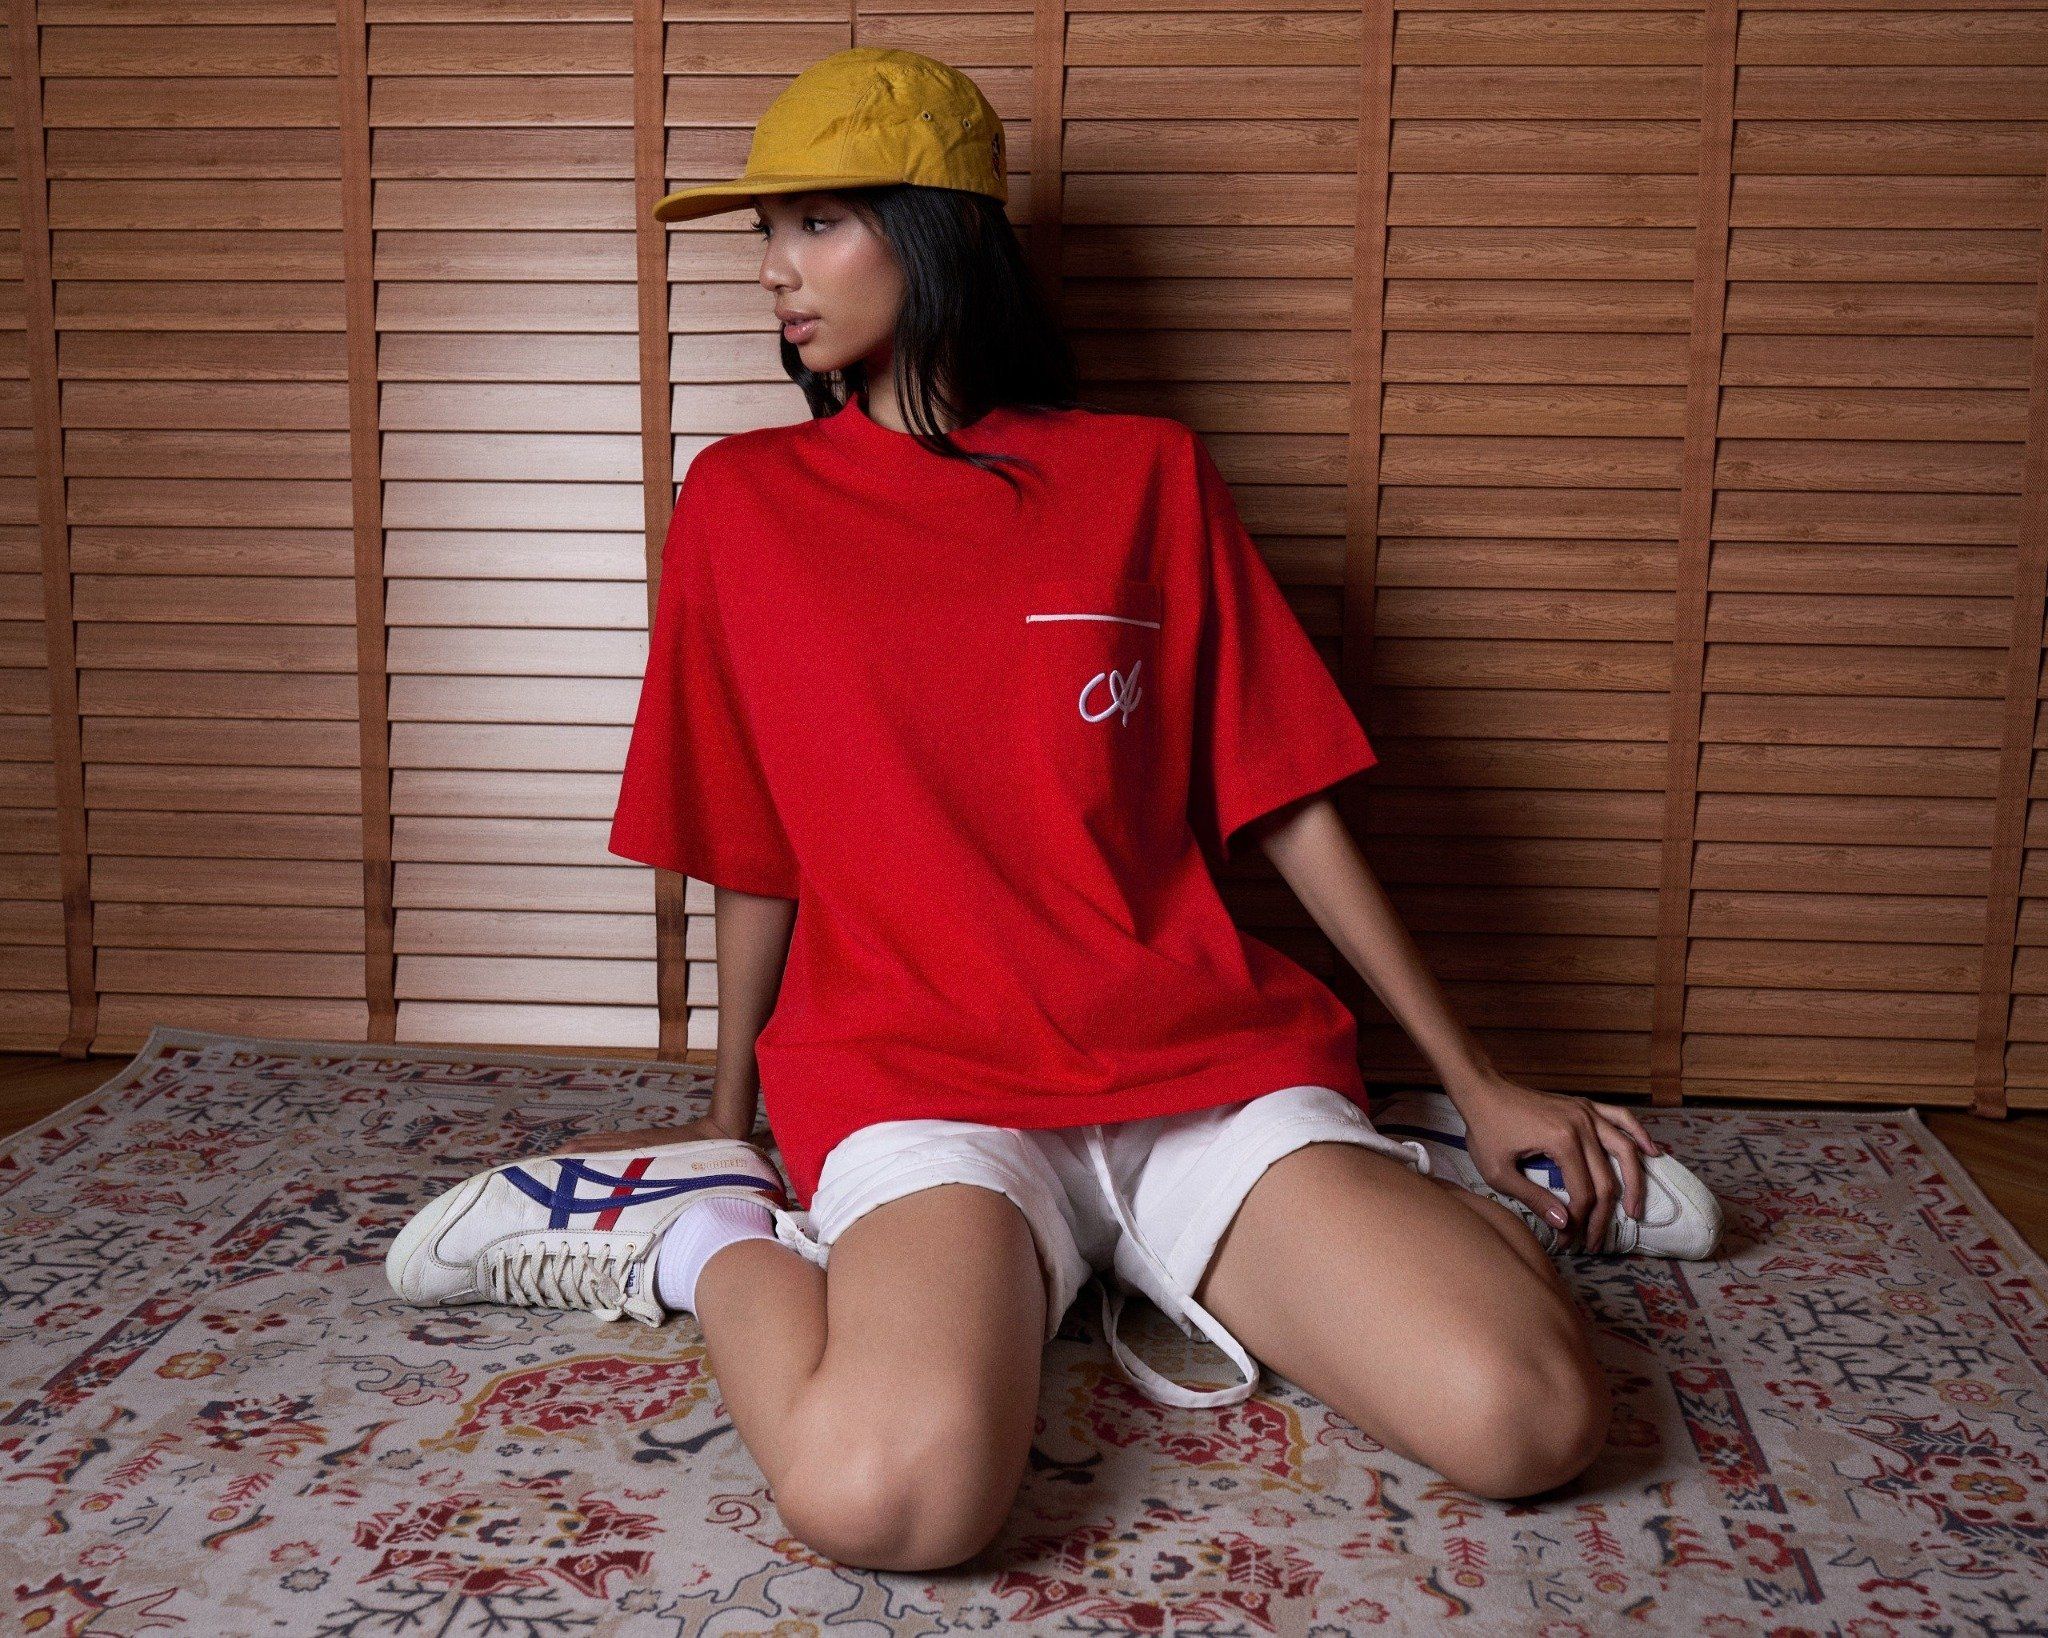  Embroidery Pocket TShirt - Red 